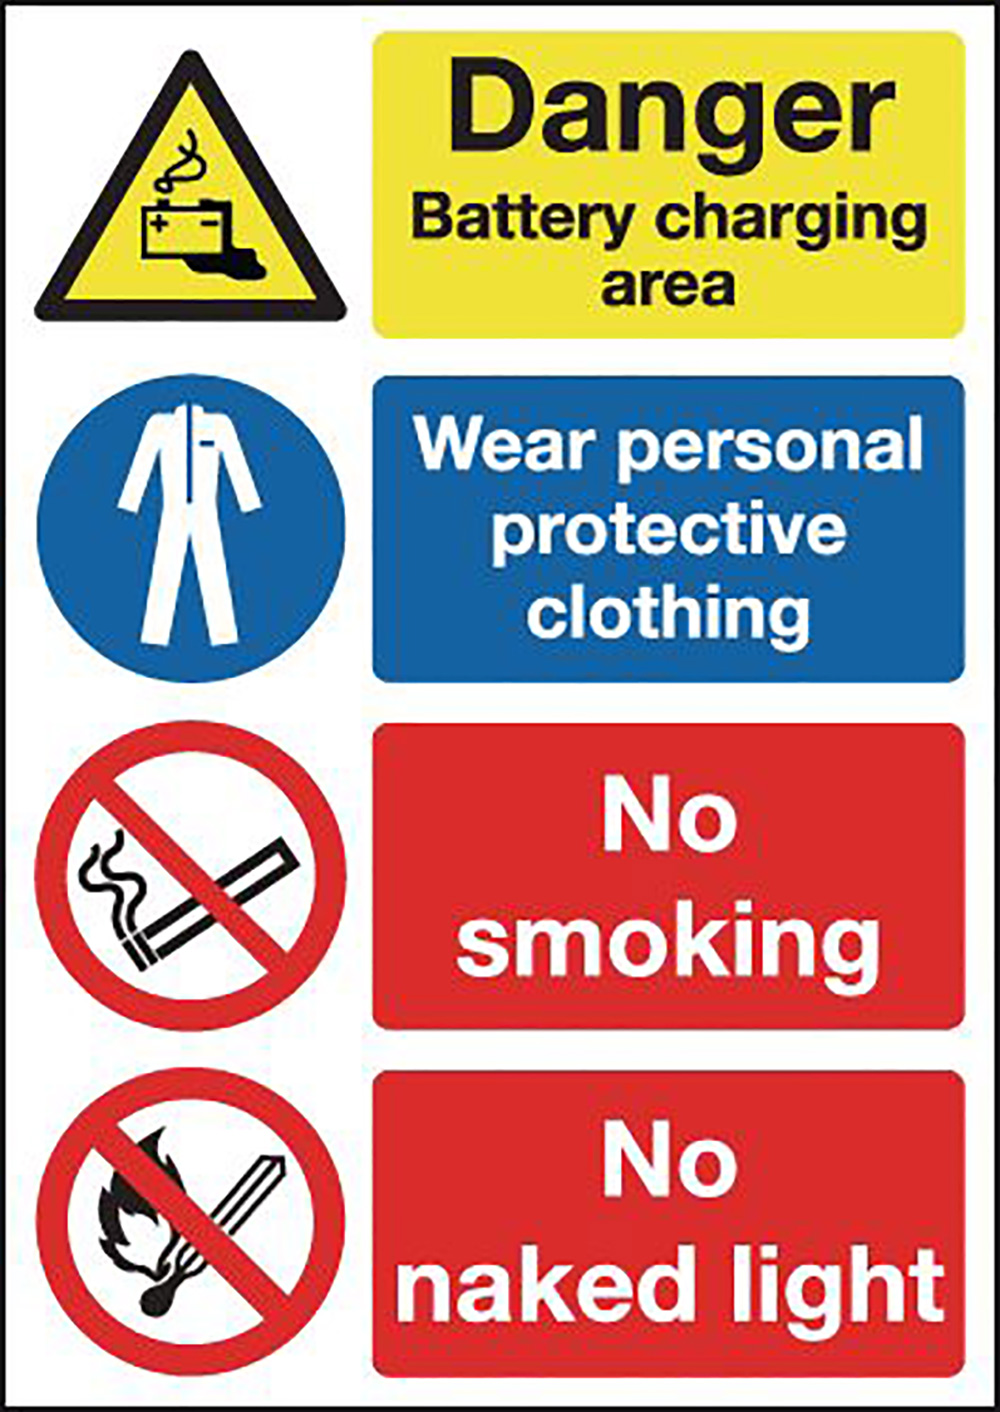 Danger Battery Charging Area Wear PP Clothing No Smoking No Naked Light 297x210mm Rigid Sign 